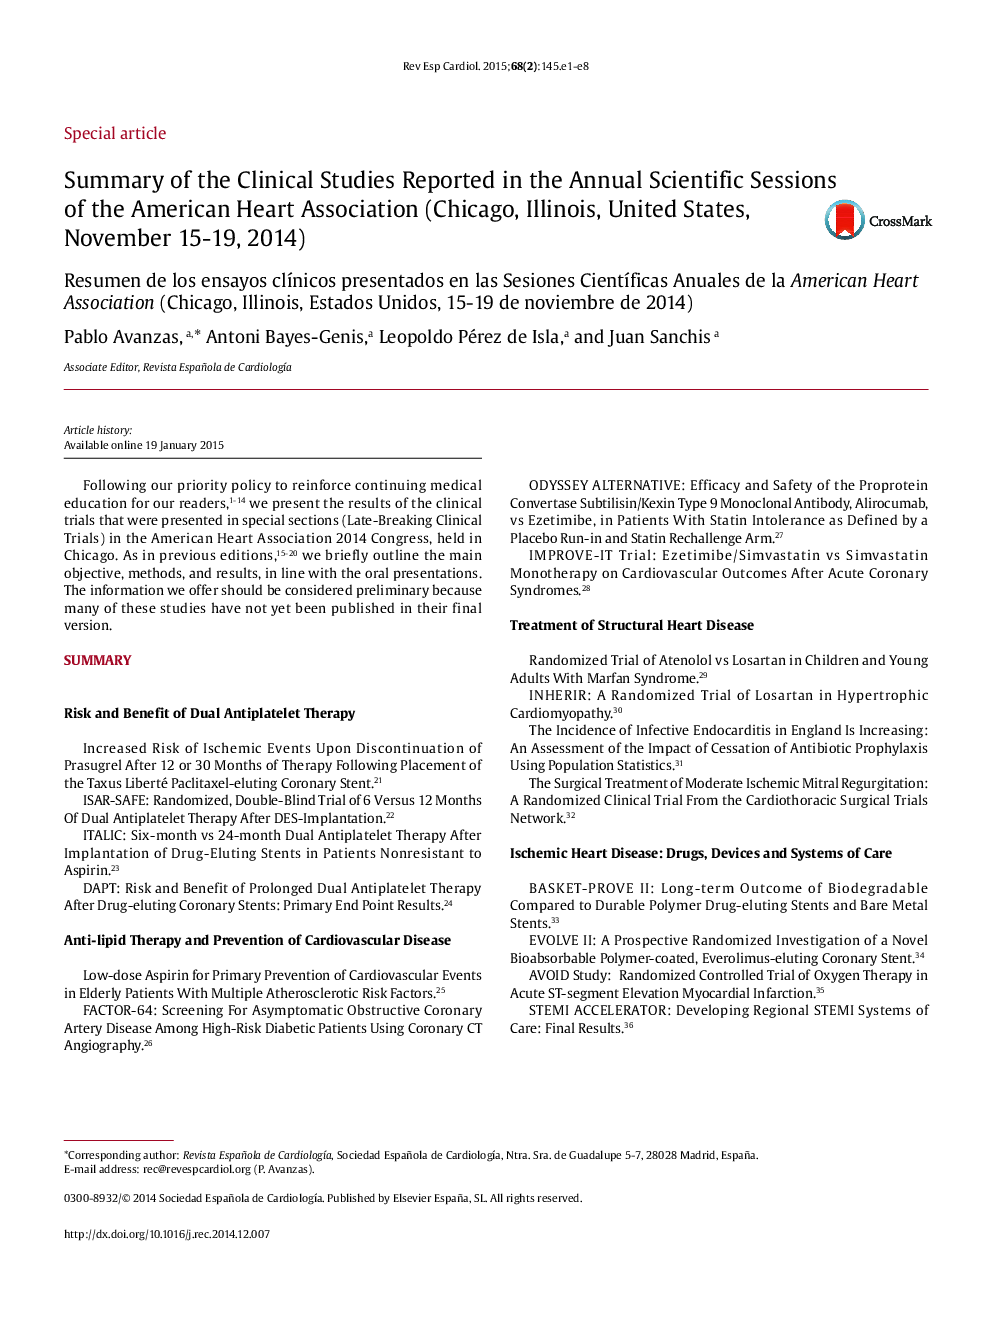 Summary of the Clinical Studies Reported in the Annual Scientific Sessions of the American Heart Association (Chicago, Illinois, United States, November 15-19, 2014)